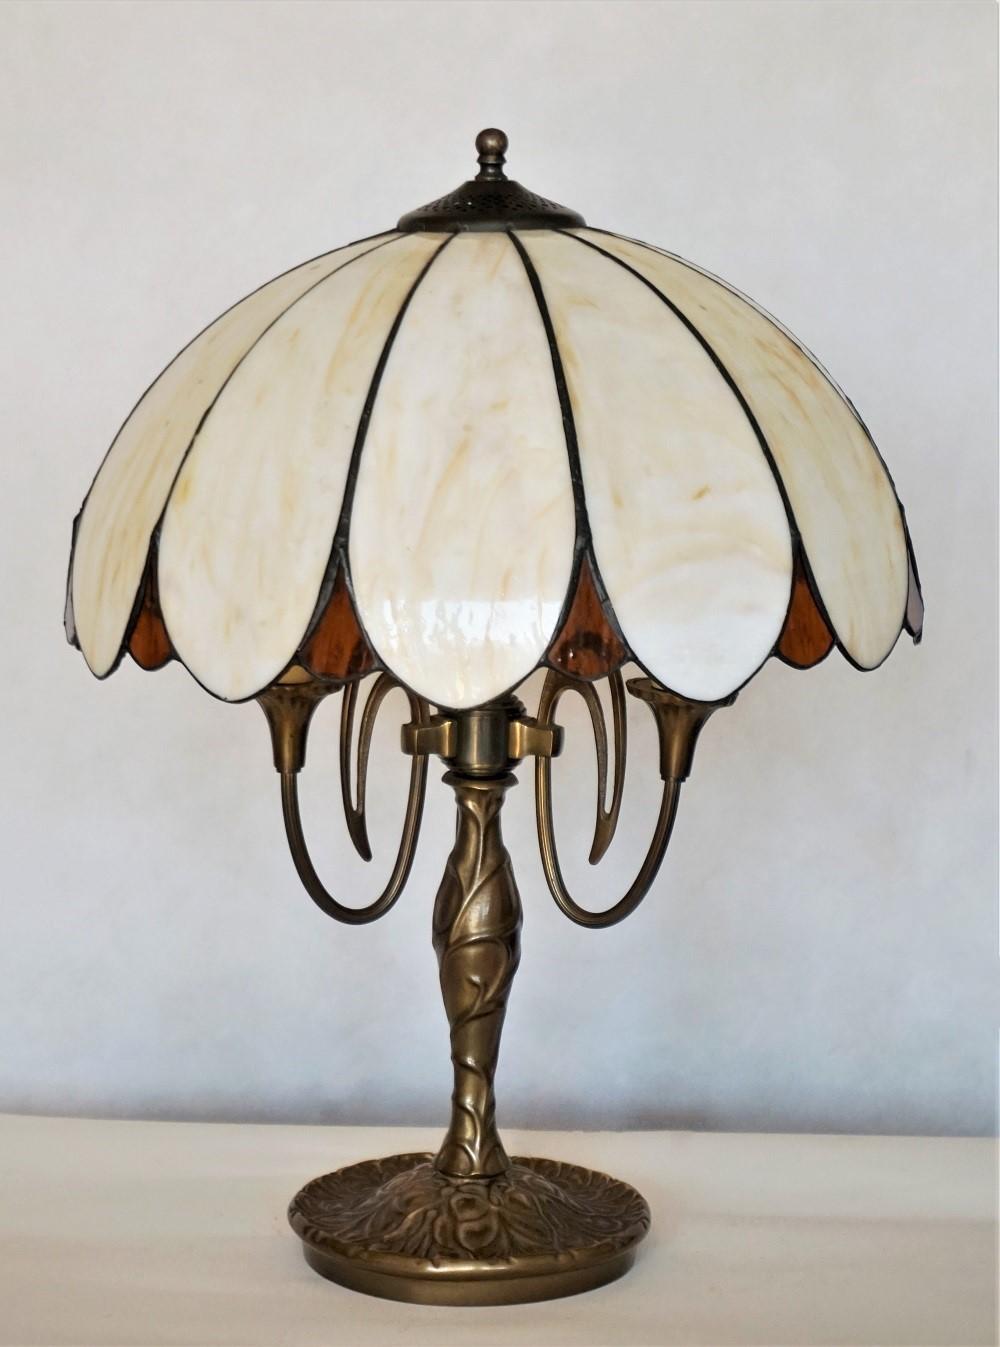 Early Art Deco bronze table lamp from 1910-1920. Dome form shade with twelve bent slag glass panels on a large bronze foliarte base with integrated central three-light candelabra bulb holder. This beautiful lamp is in very good condition and has